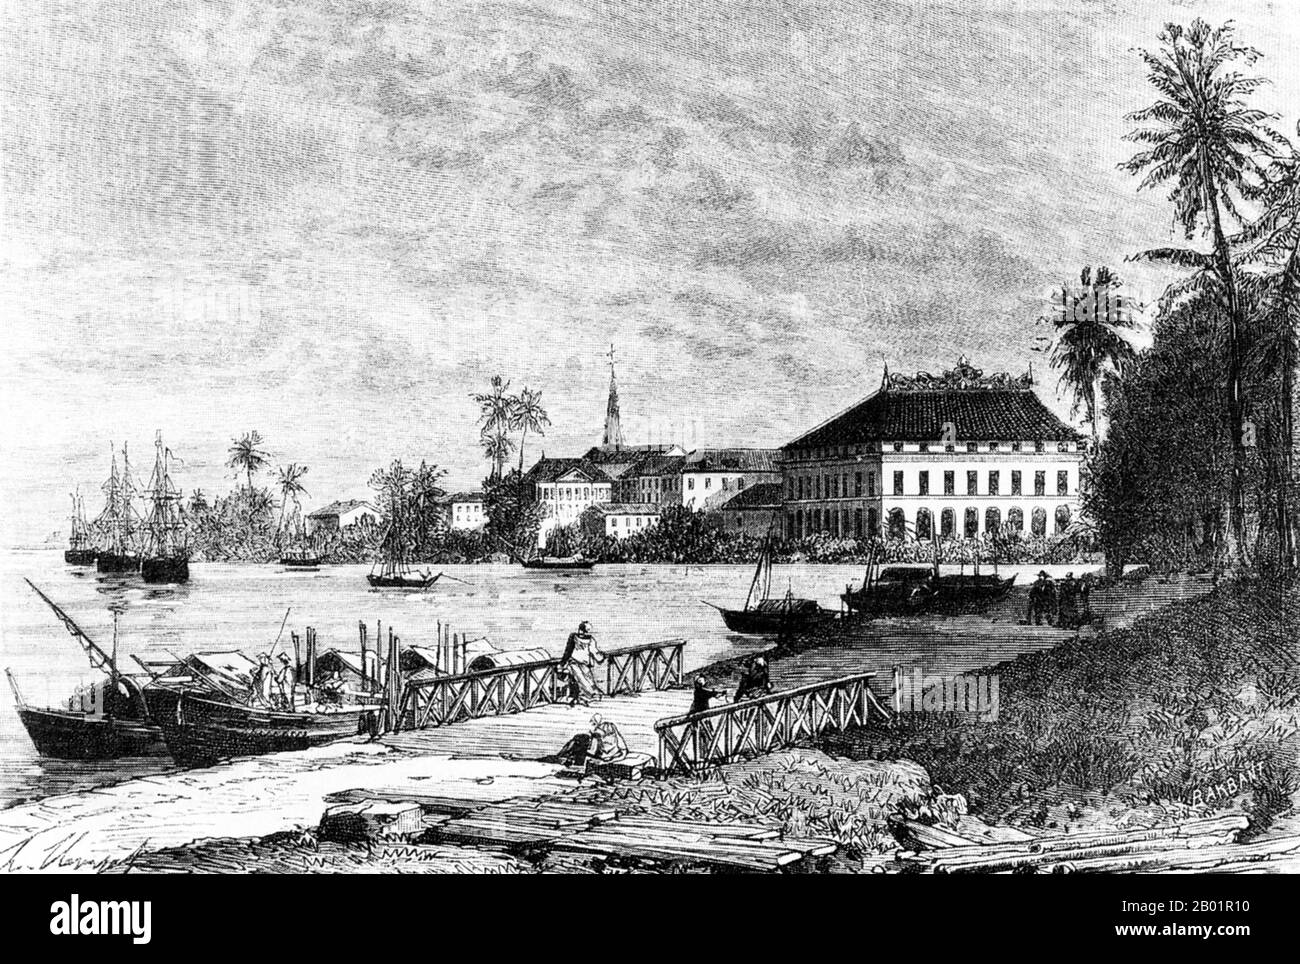 Vietnam: The port of  Saigon. Engraving by V. A. Malt-Brown from 'La France Illustree', 1884.  French Indochina was part of the French colonial empire in Southeast Asia. A federation of the three Vietnamese regions, Tonkin (North), Annam (Central), and Cochinchina (South), as well as Cambodia, was formed in 1887. Stock Photo